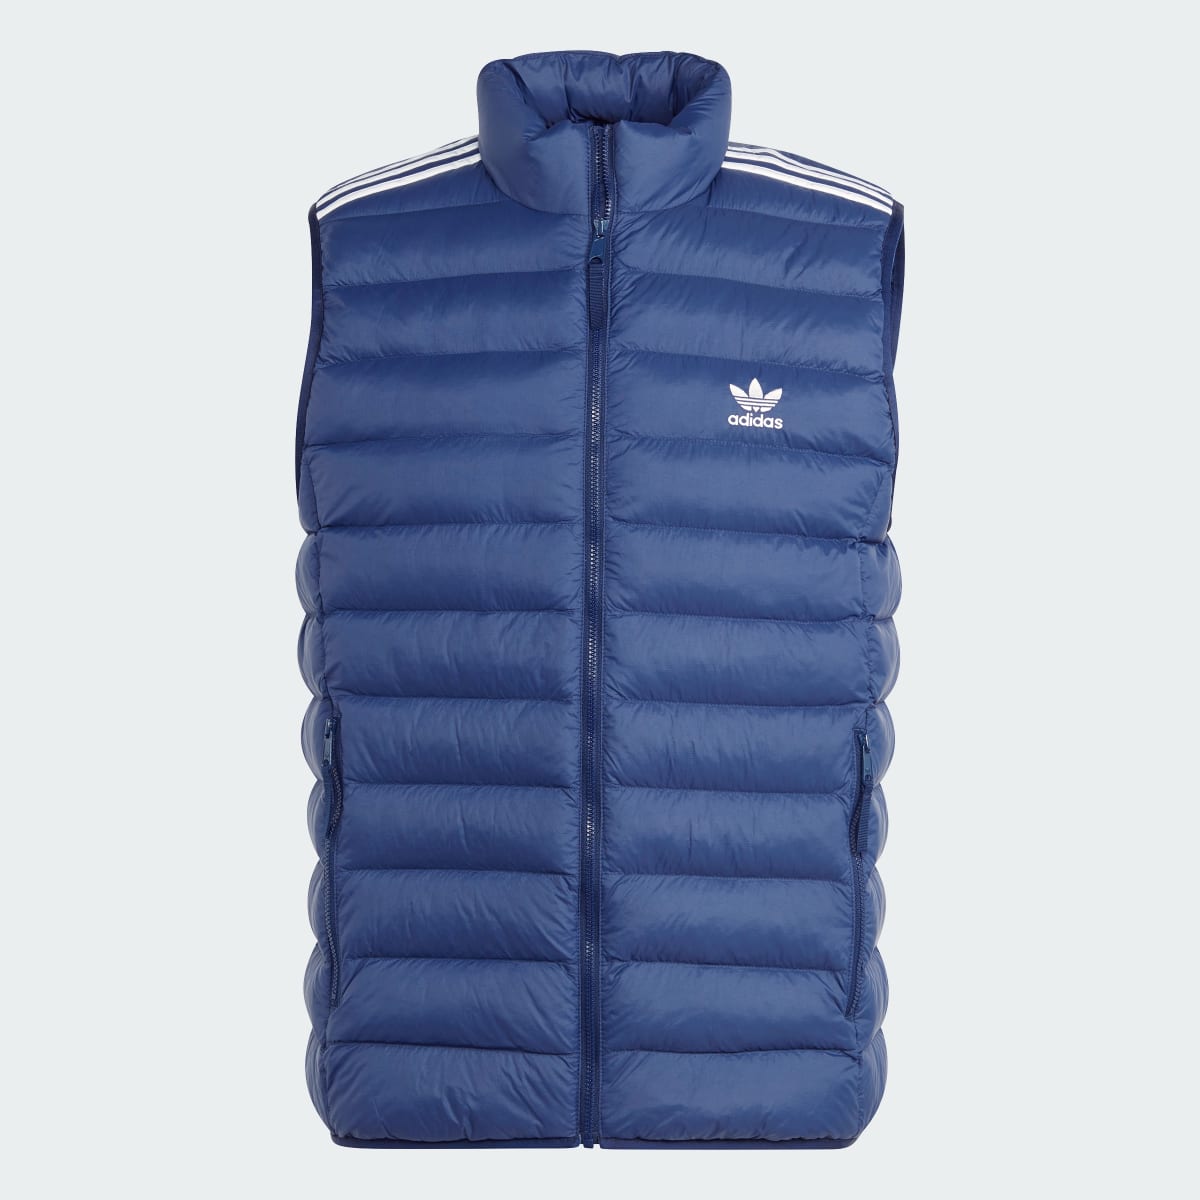 Adidas Chaleco acolchado Stand-Up Collar Puffer. 5